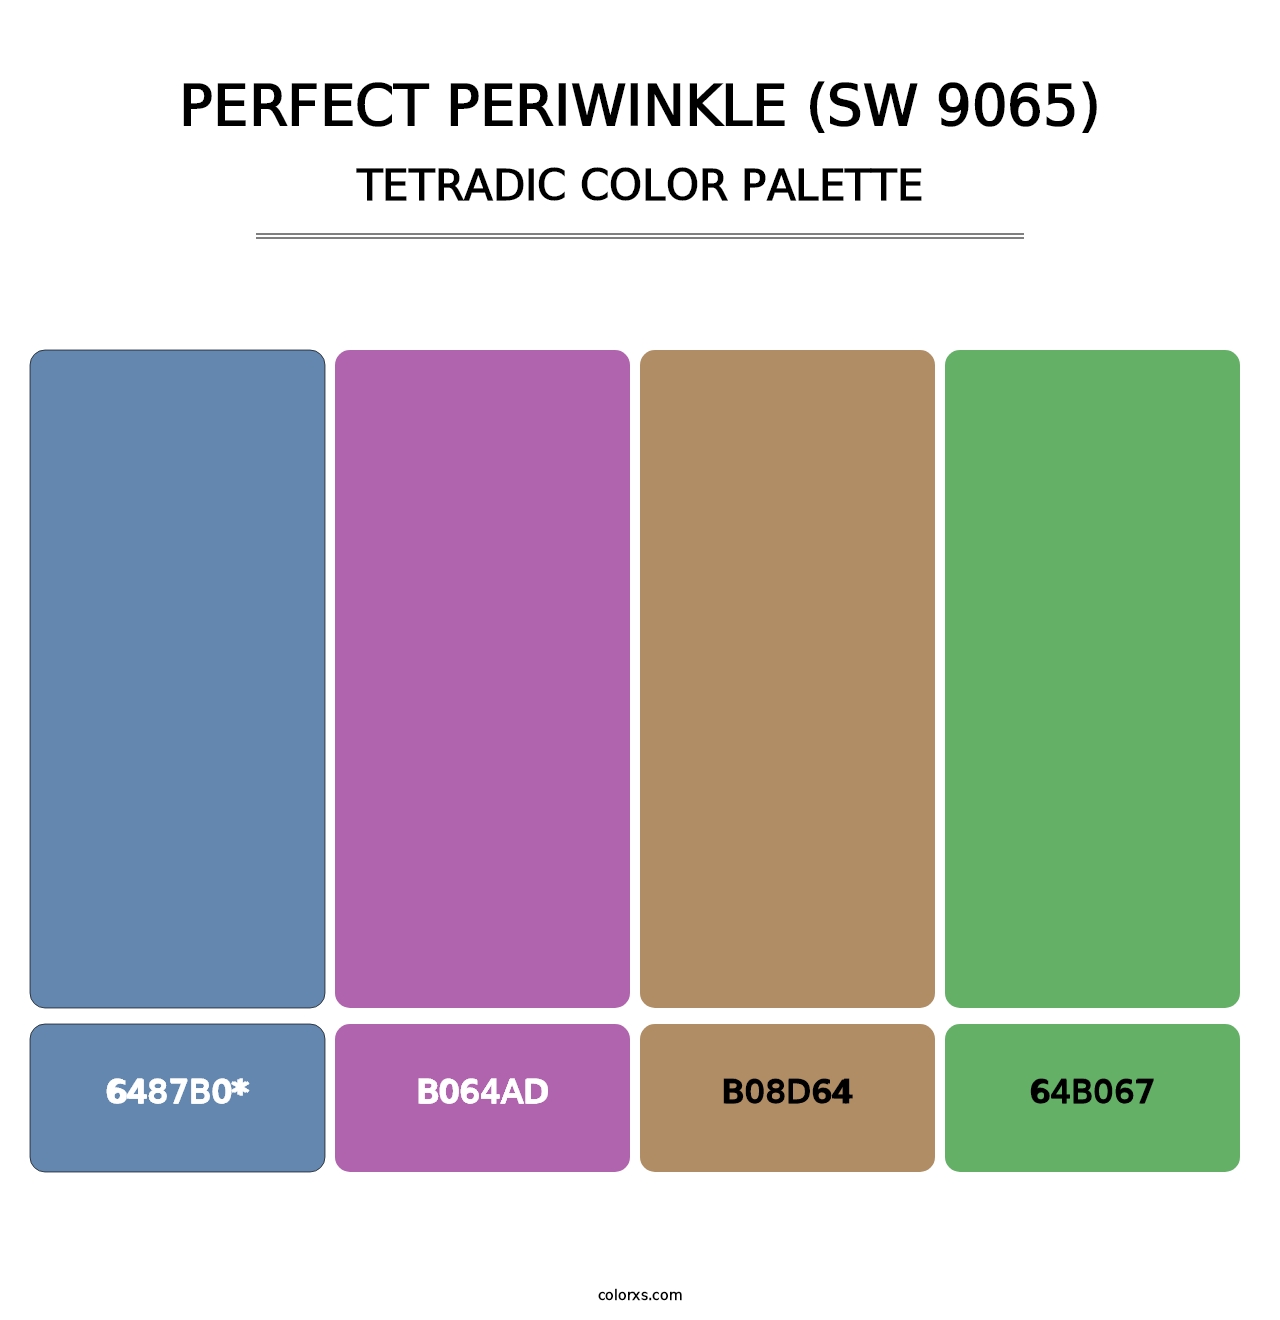 Perfect Periwinkle (SW 9065) - Tetradic Color Palette